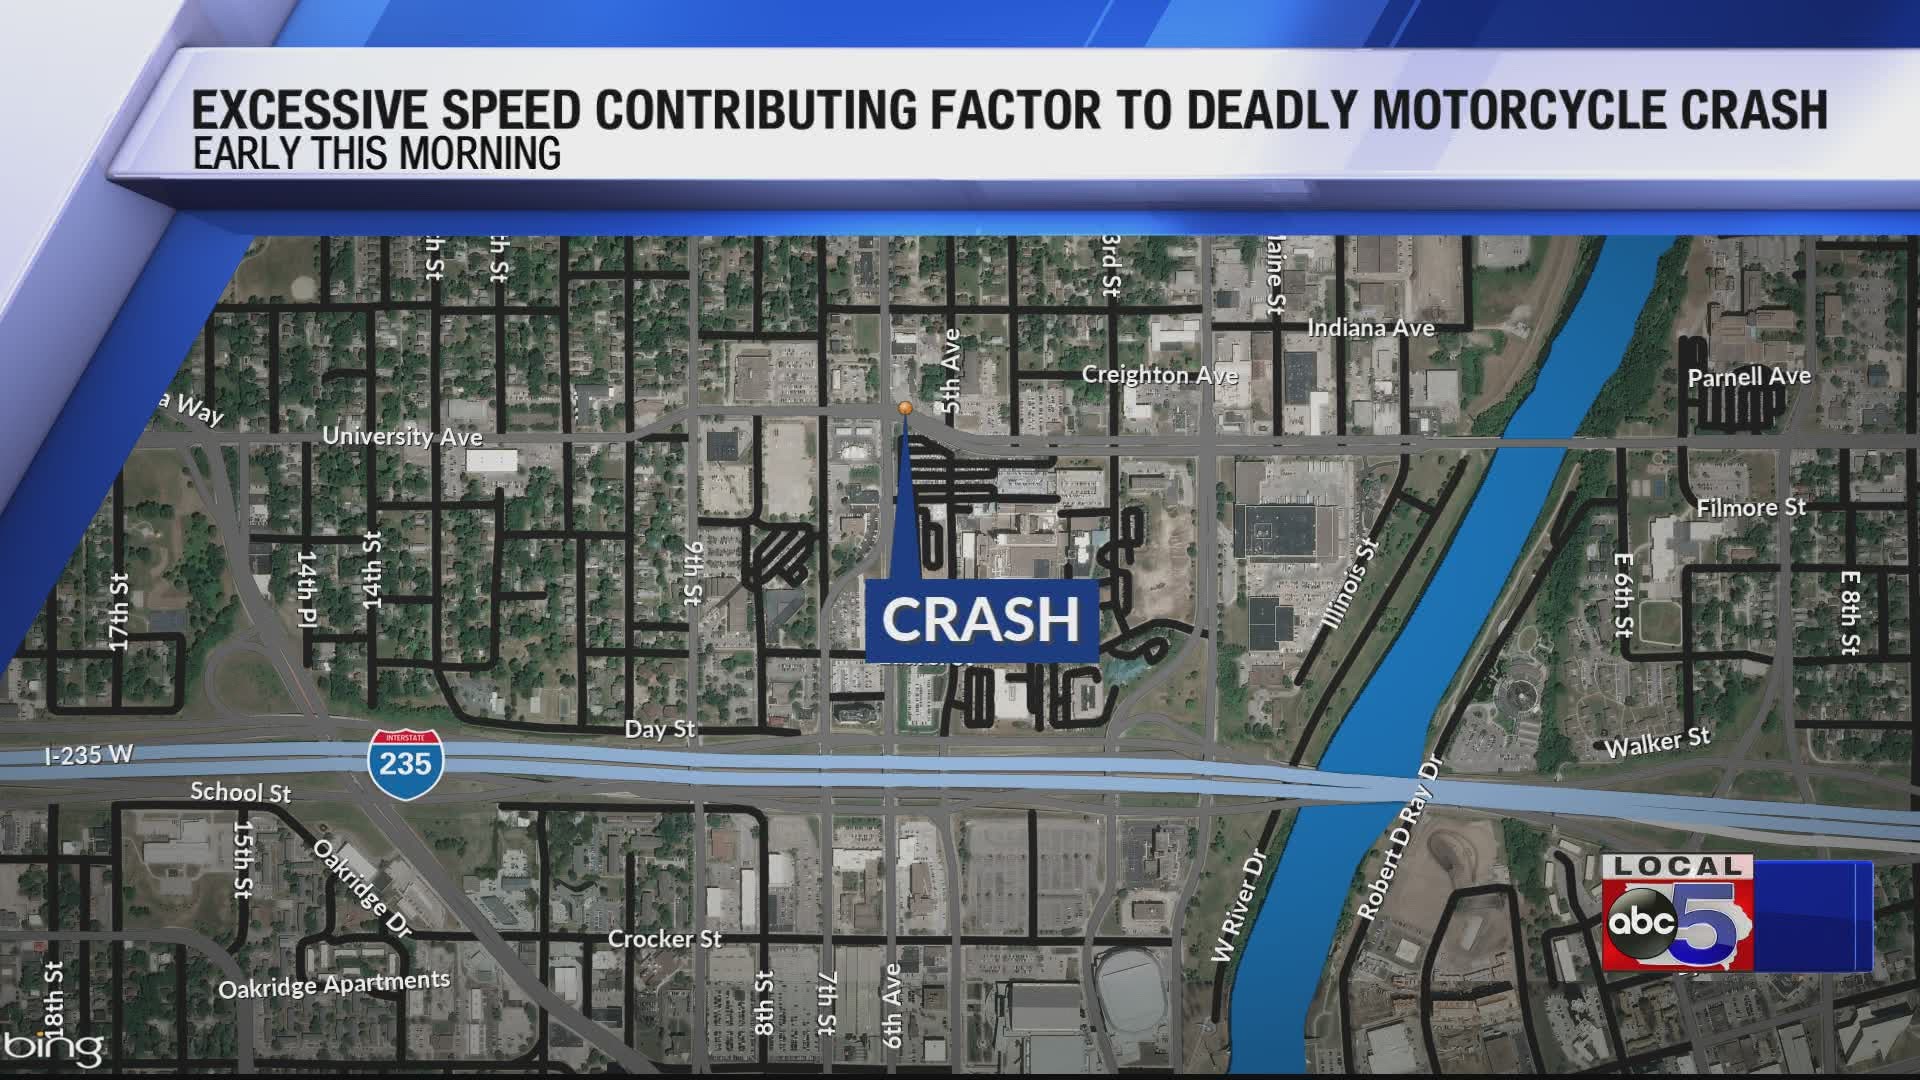 Police believe excessive speed was the contributing factor the deadly accident.